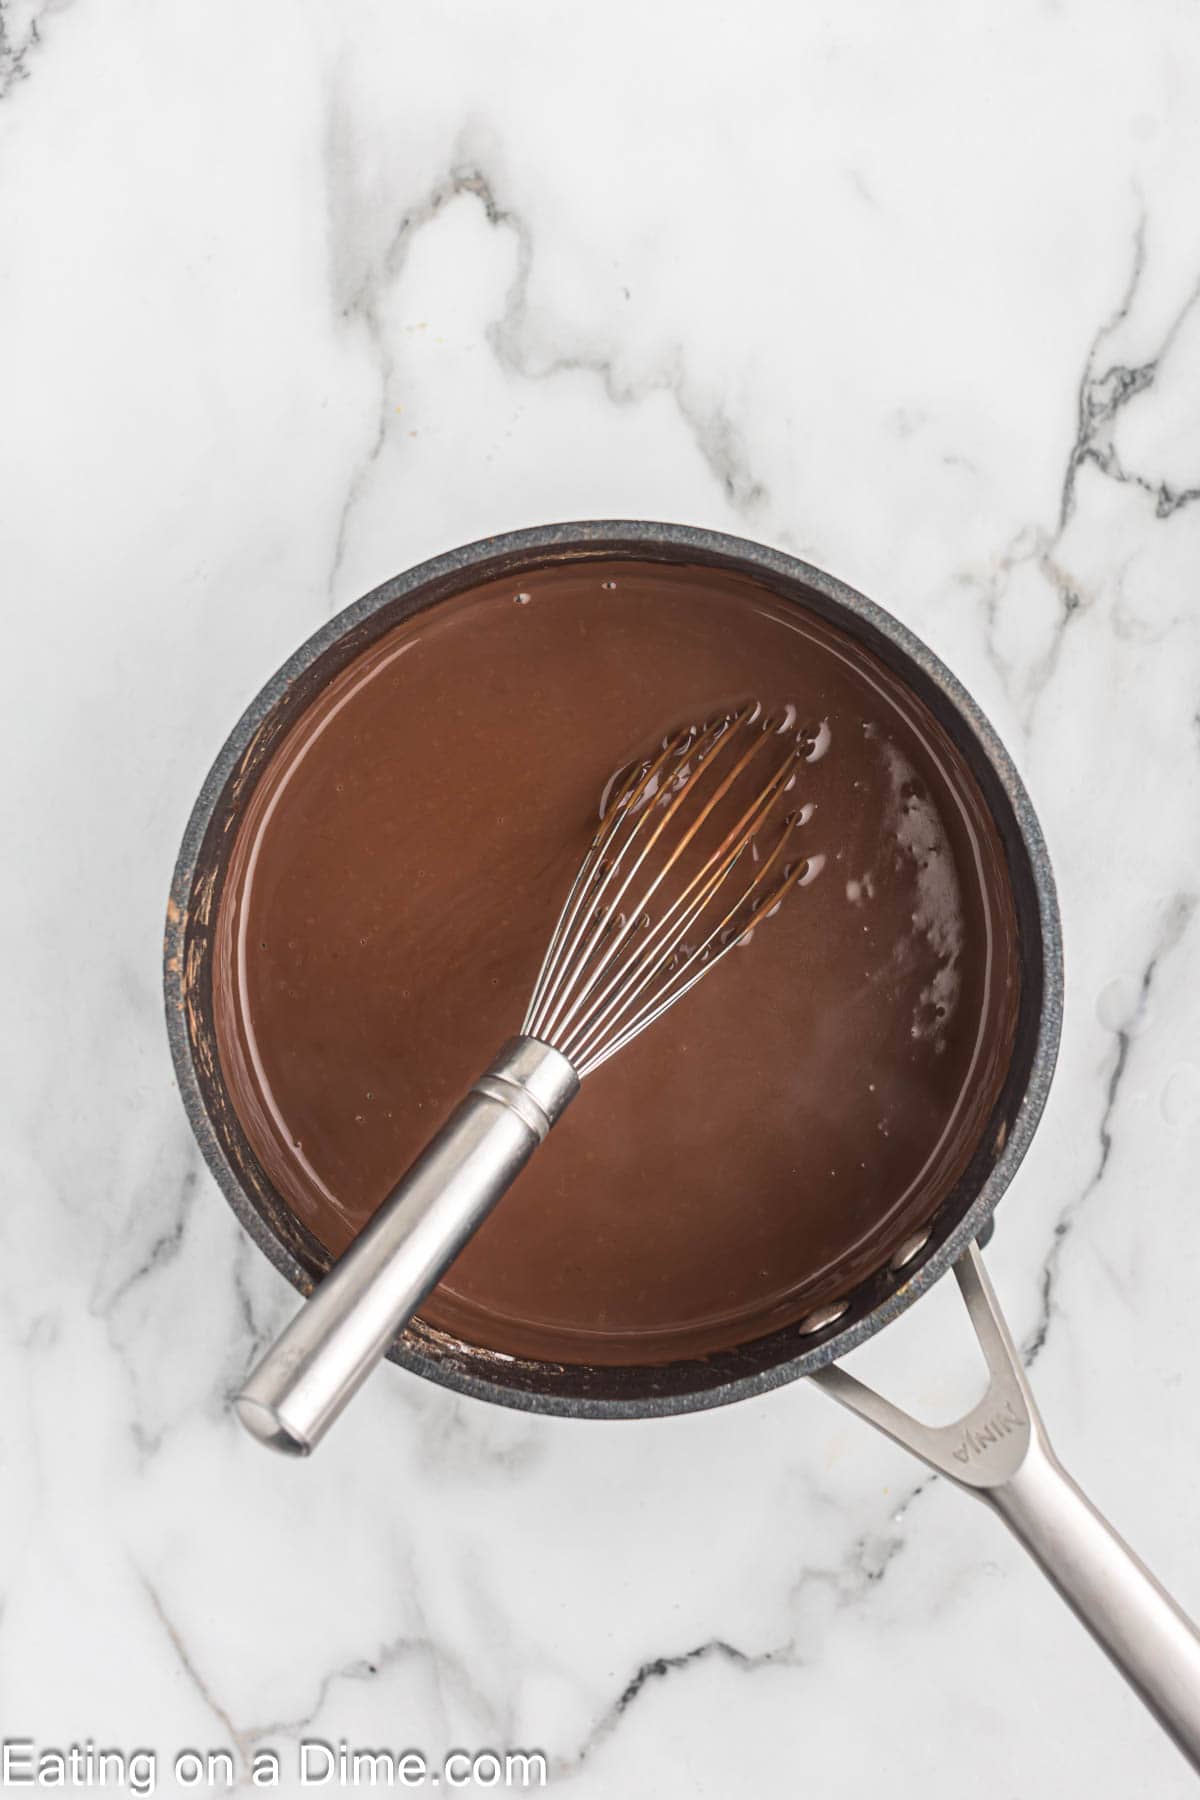 Whisking the chocolate pudding in a sauce pan